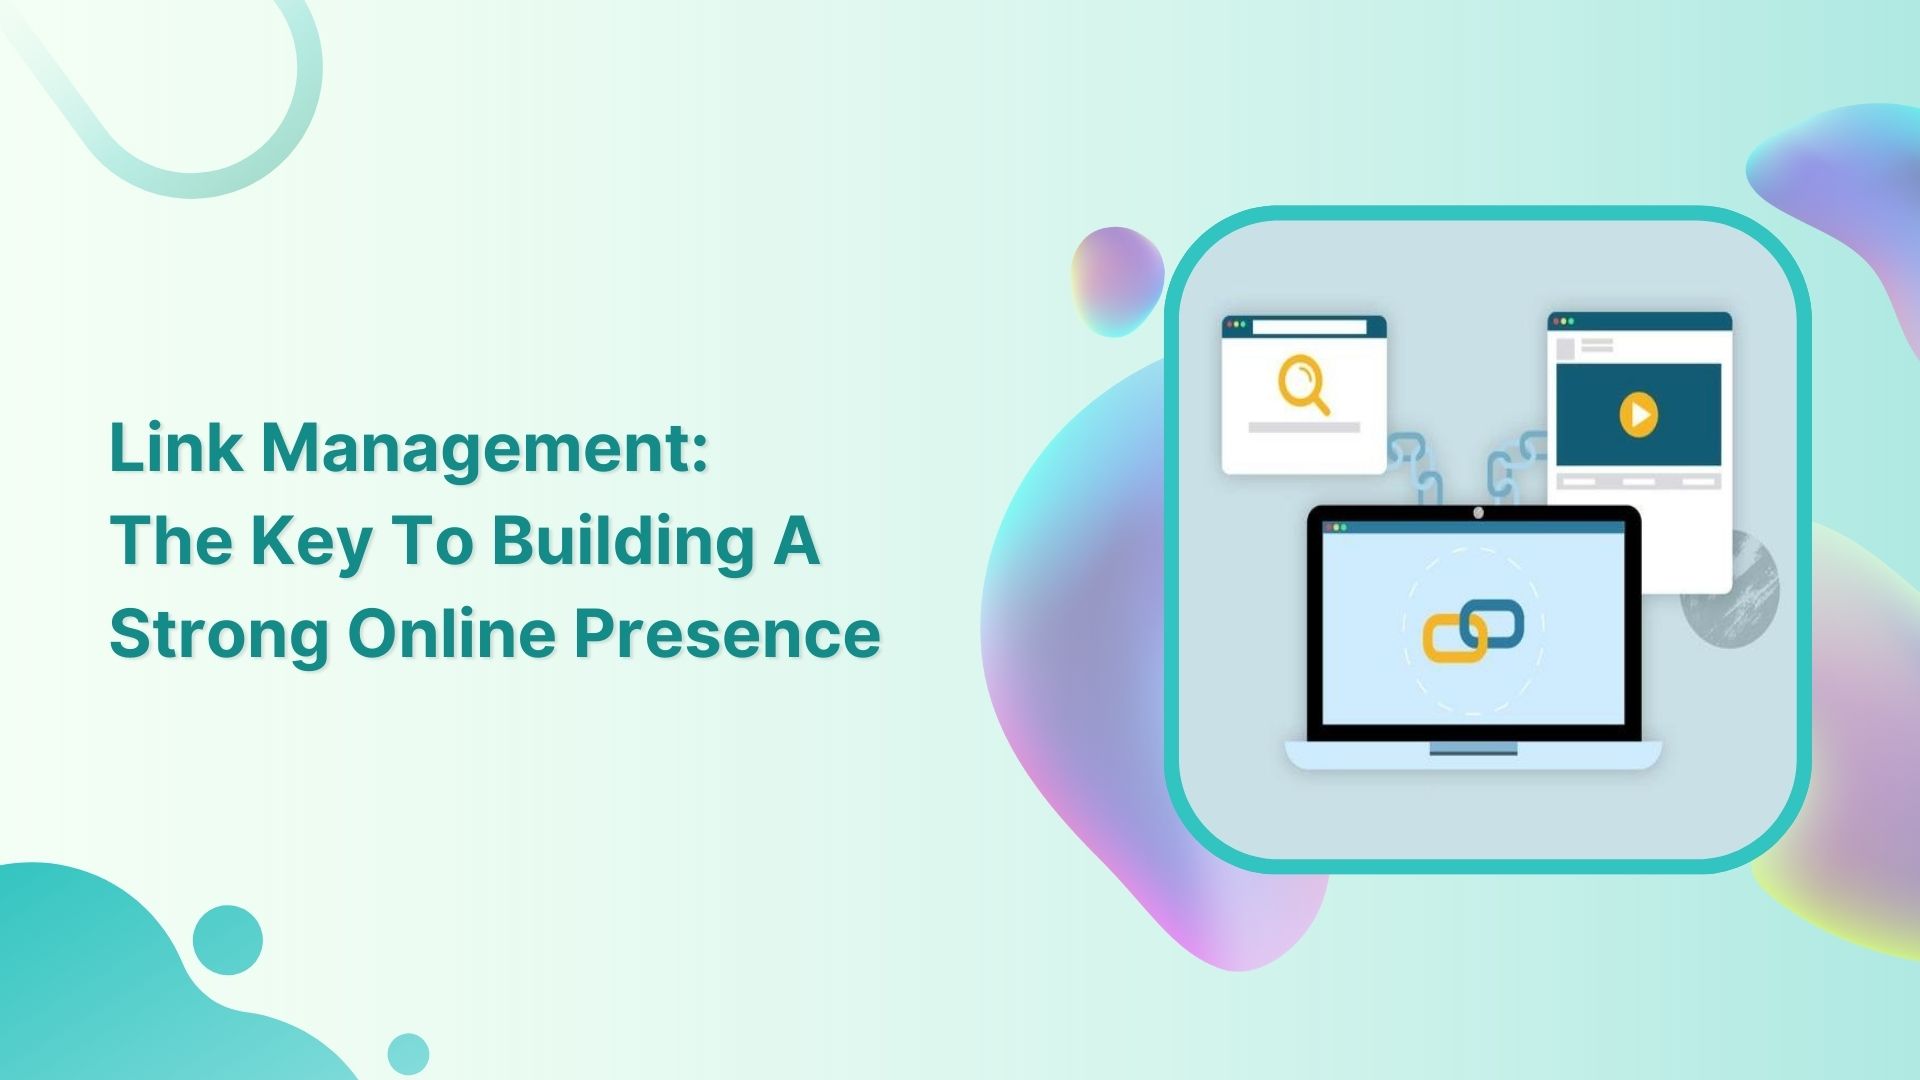 Role of Link Management in Building a Strong Online Presence